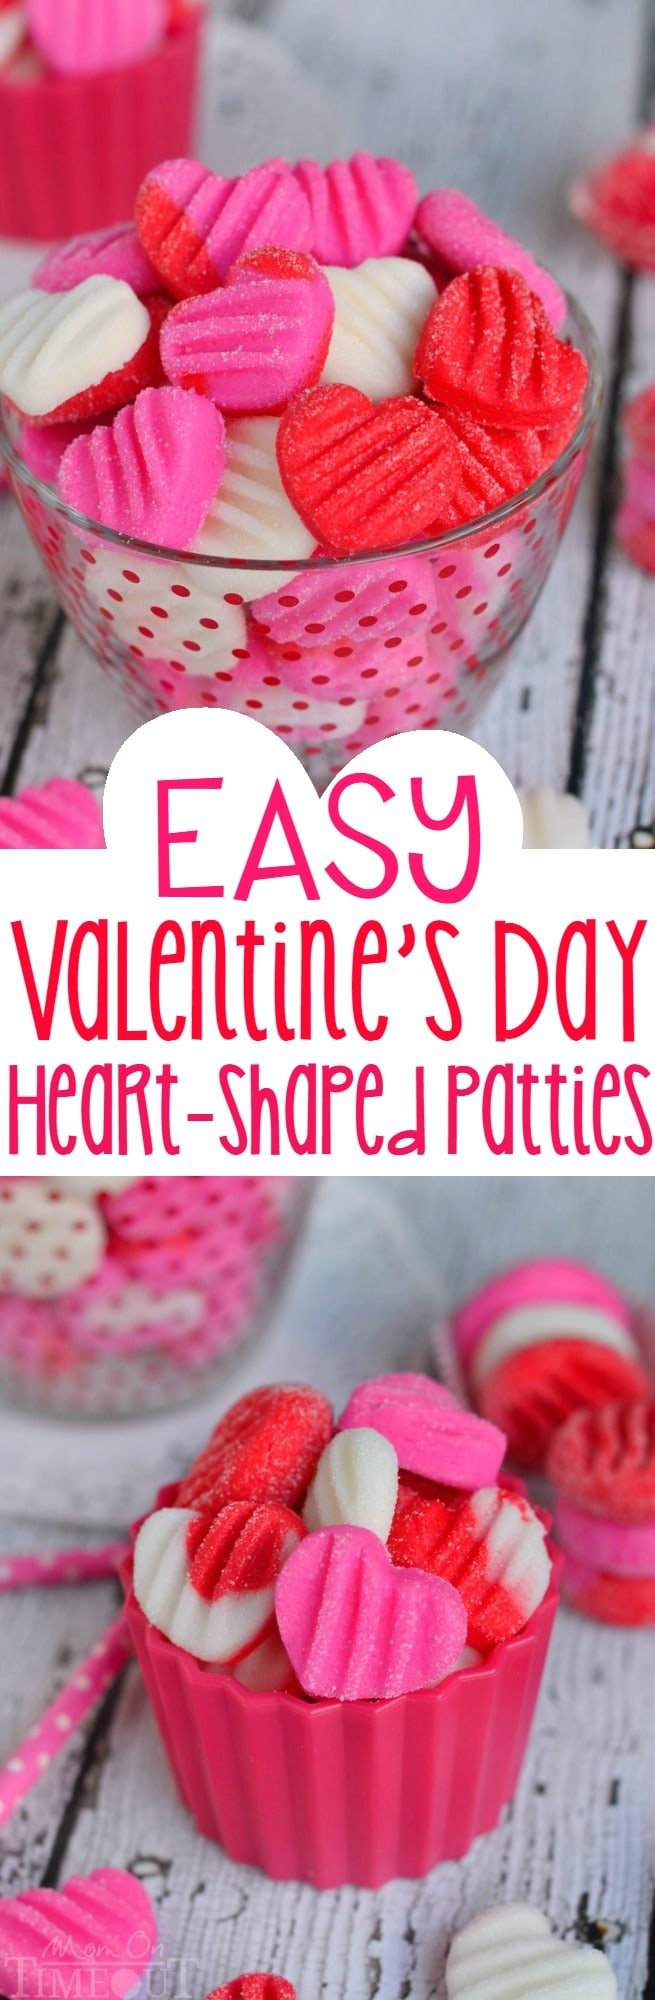 Celebrate the sweetness of Valentine's Day with these Easy Valentine's Day Patties - you choose the flavor!